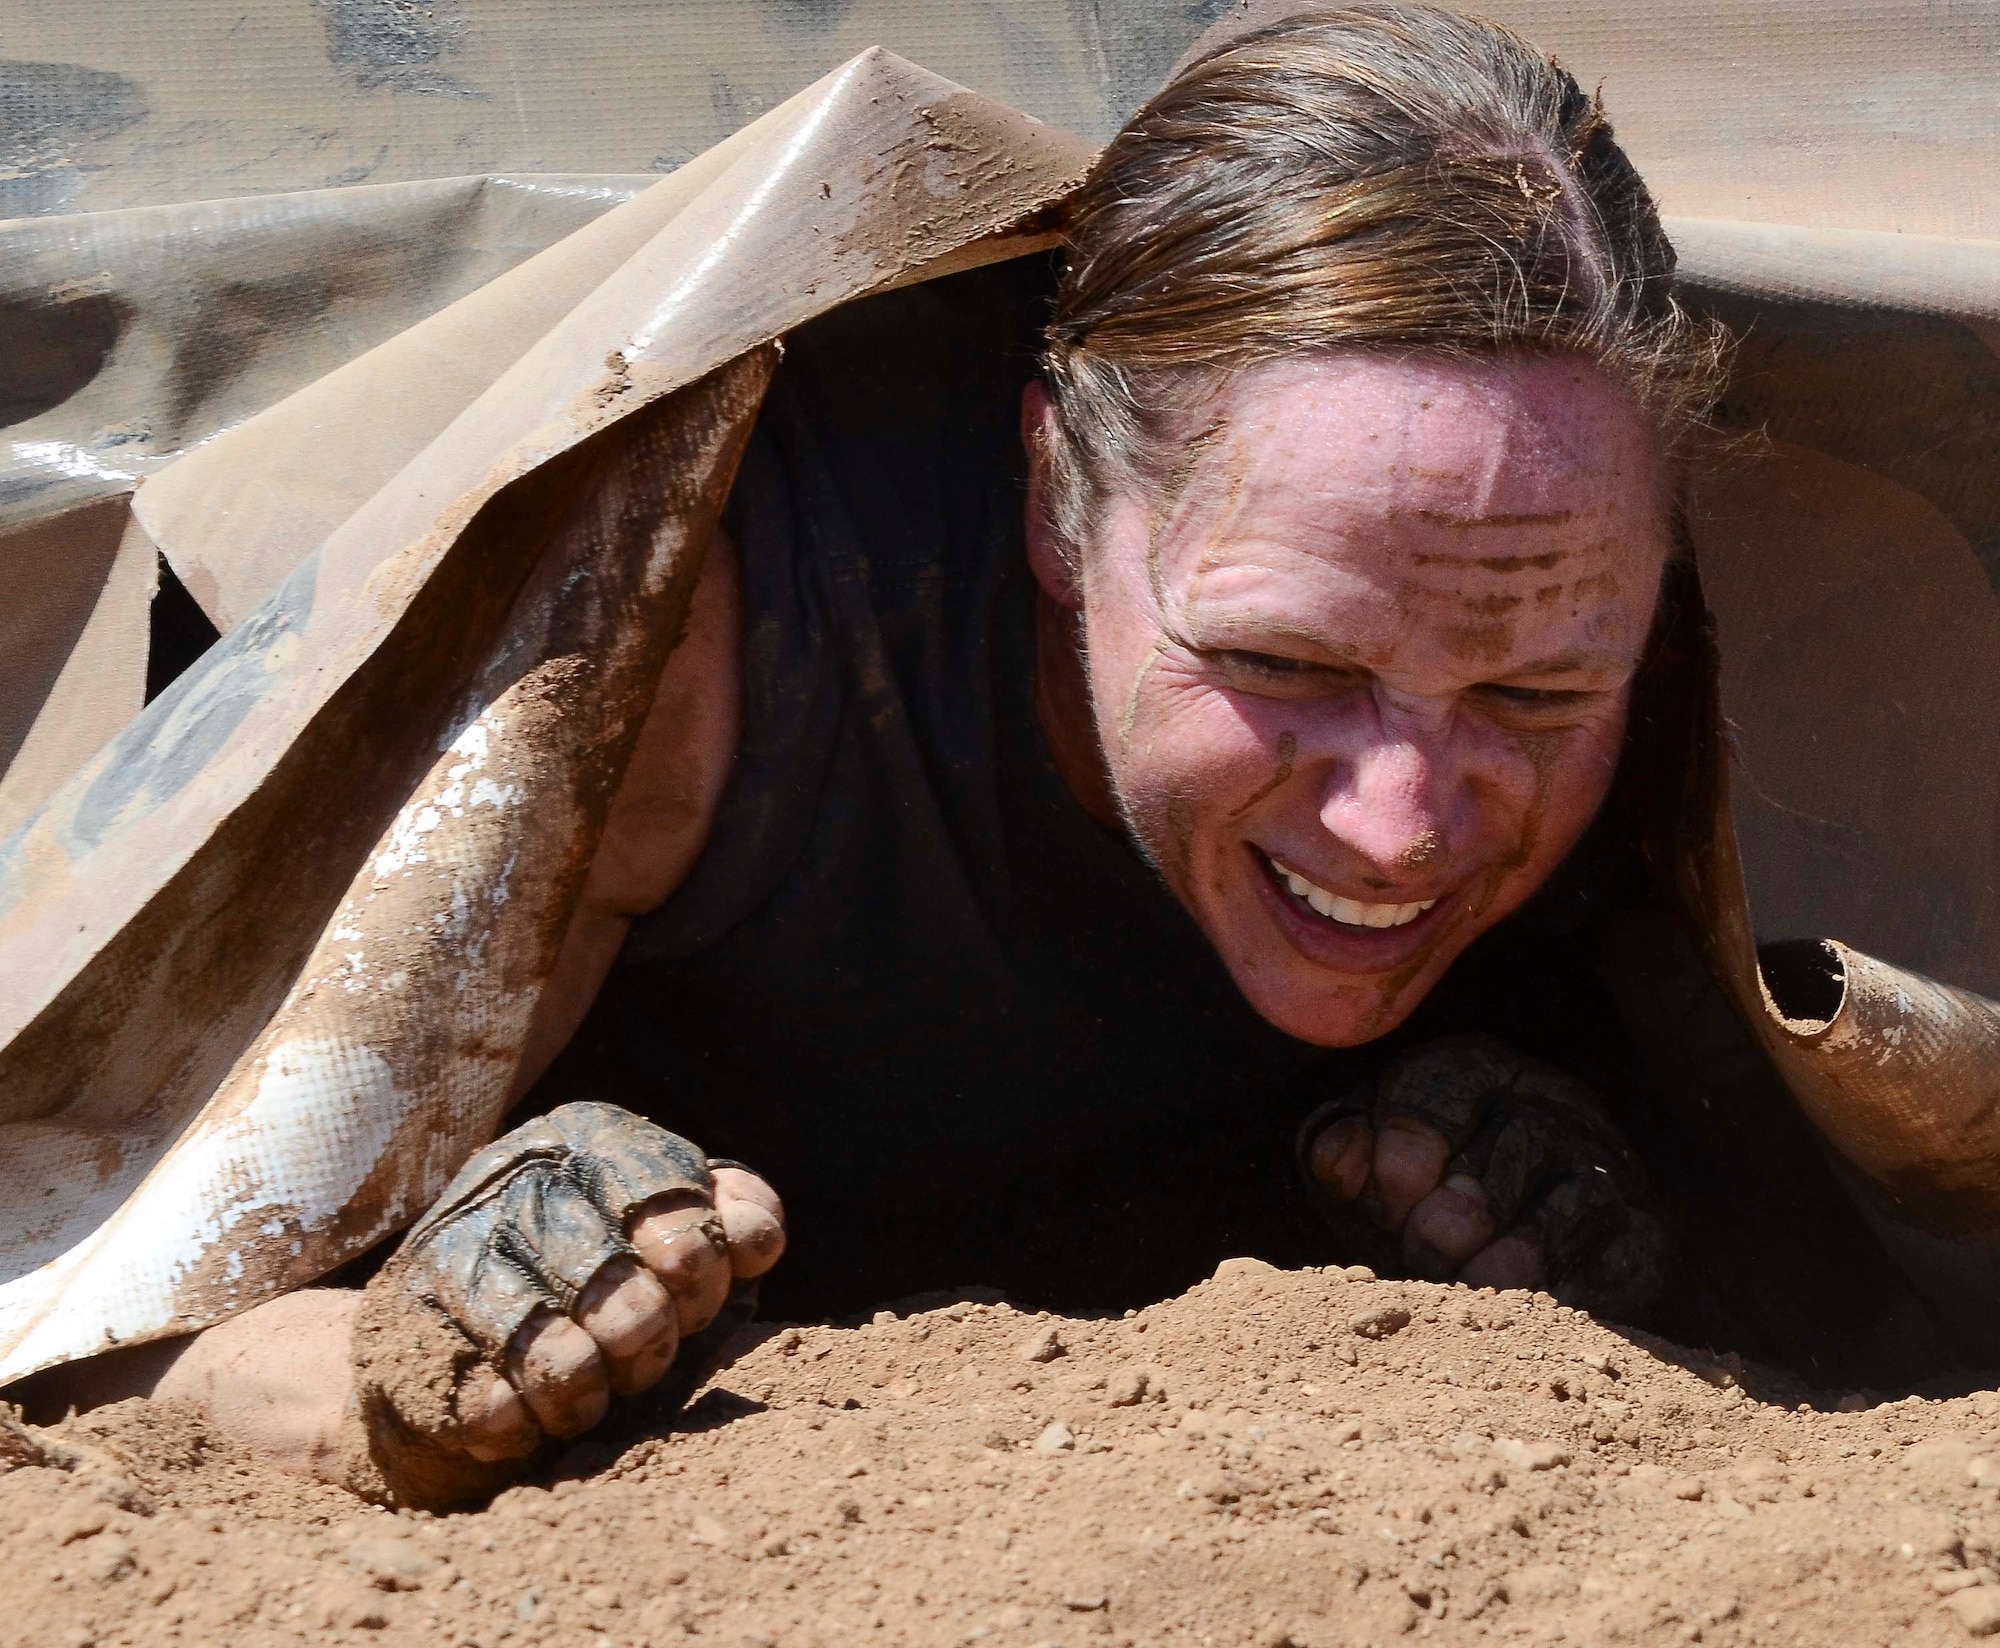 Capt. Yvonne Nollmann, 12th Air Force (Air Forces Southern) Section Commander, crawls from underneath a tarp during the Hard Charge Televised Obstacle Mission at the Pima County Fairgrounds in Tucson, Ariz., on March 29. Climbing, crawling and sprinting were a few of the many ways the members form 12th AF maneuvered though the rigorous four-mile 37-obstacle course. (U.S. Air Force photo by Staff Sgt. Adam Grant/Released)